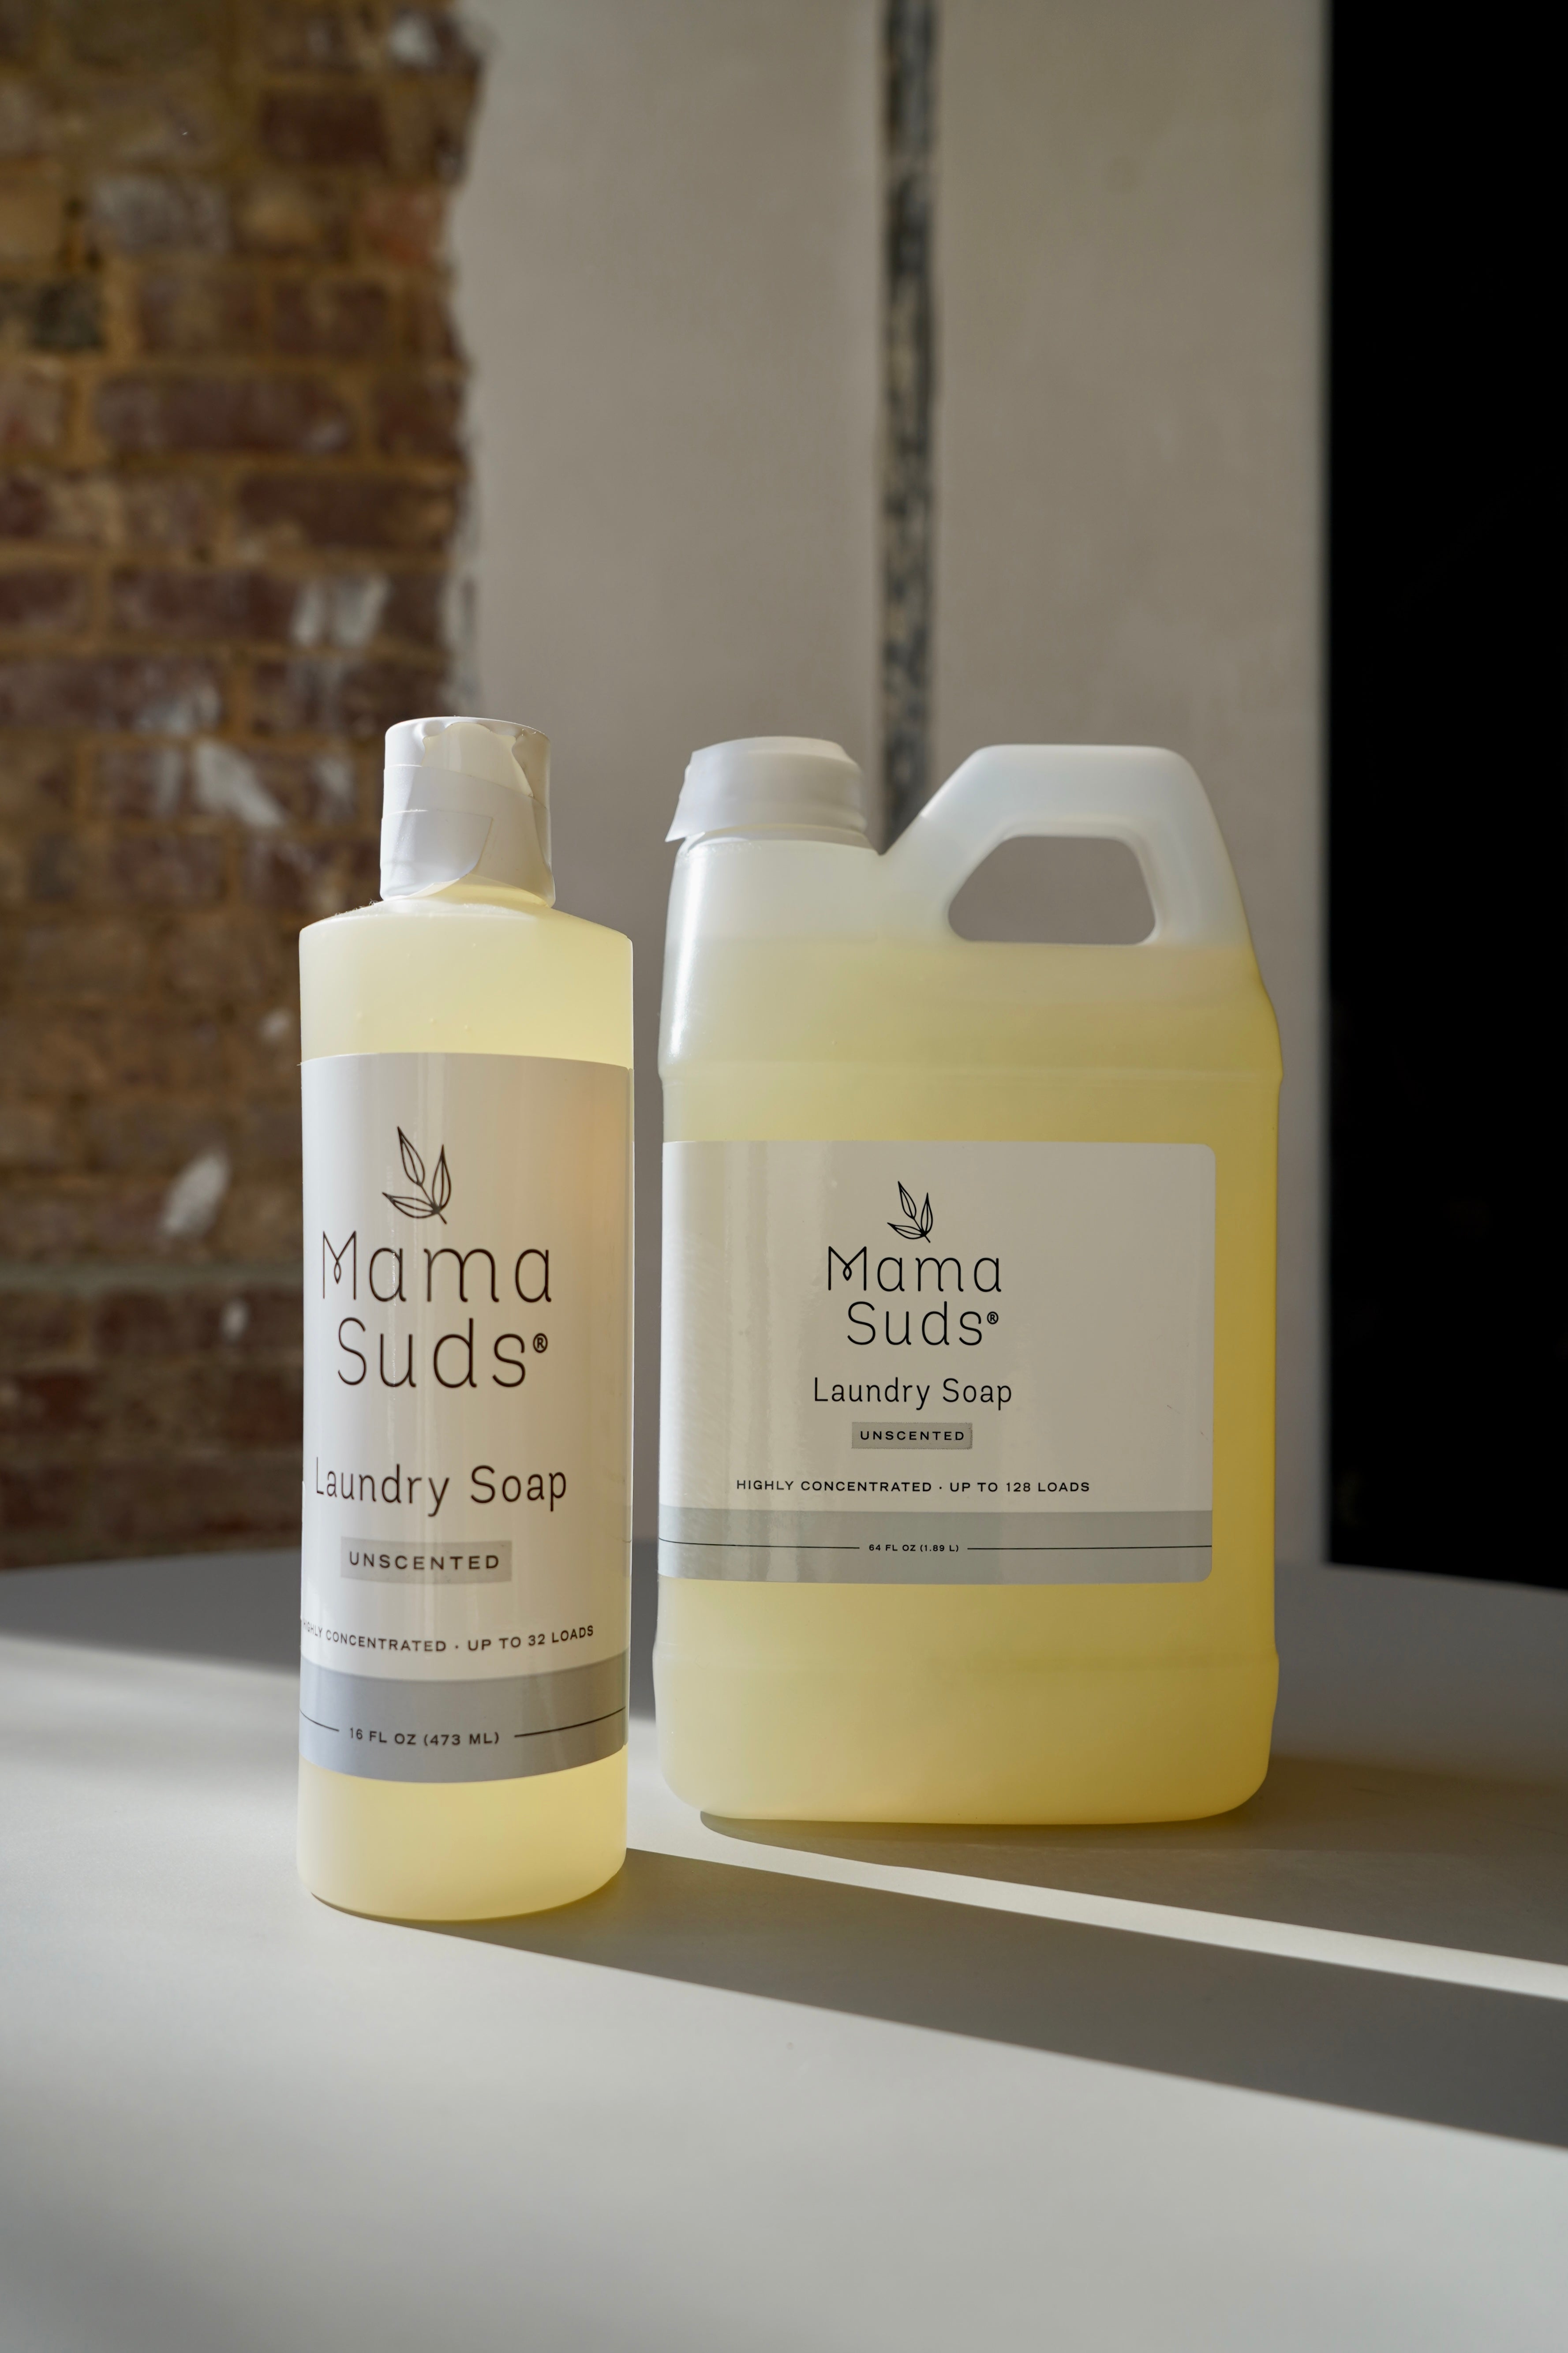 mamasuds laundry soap: unscented